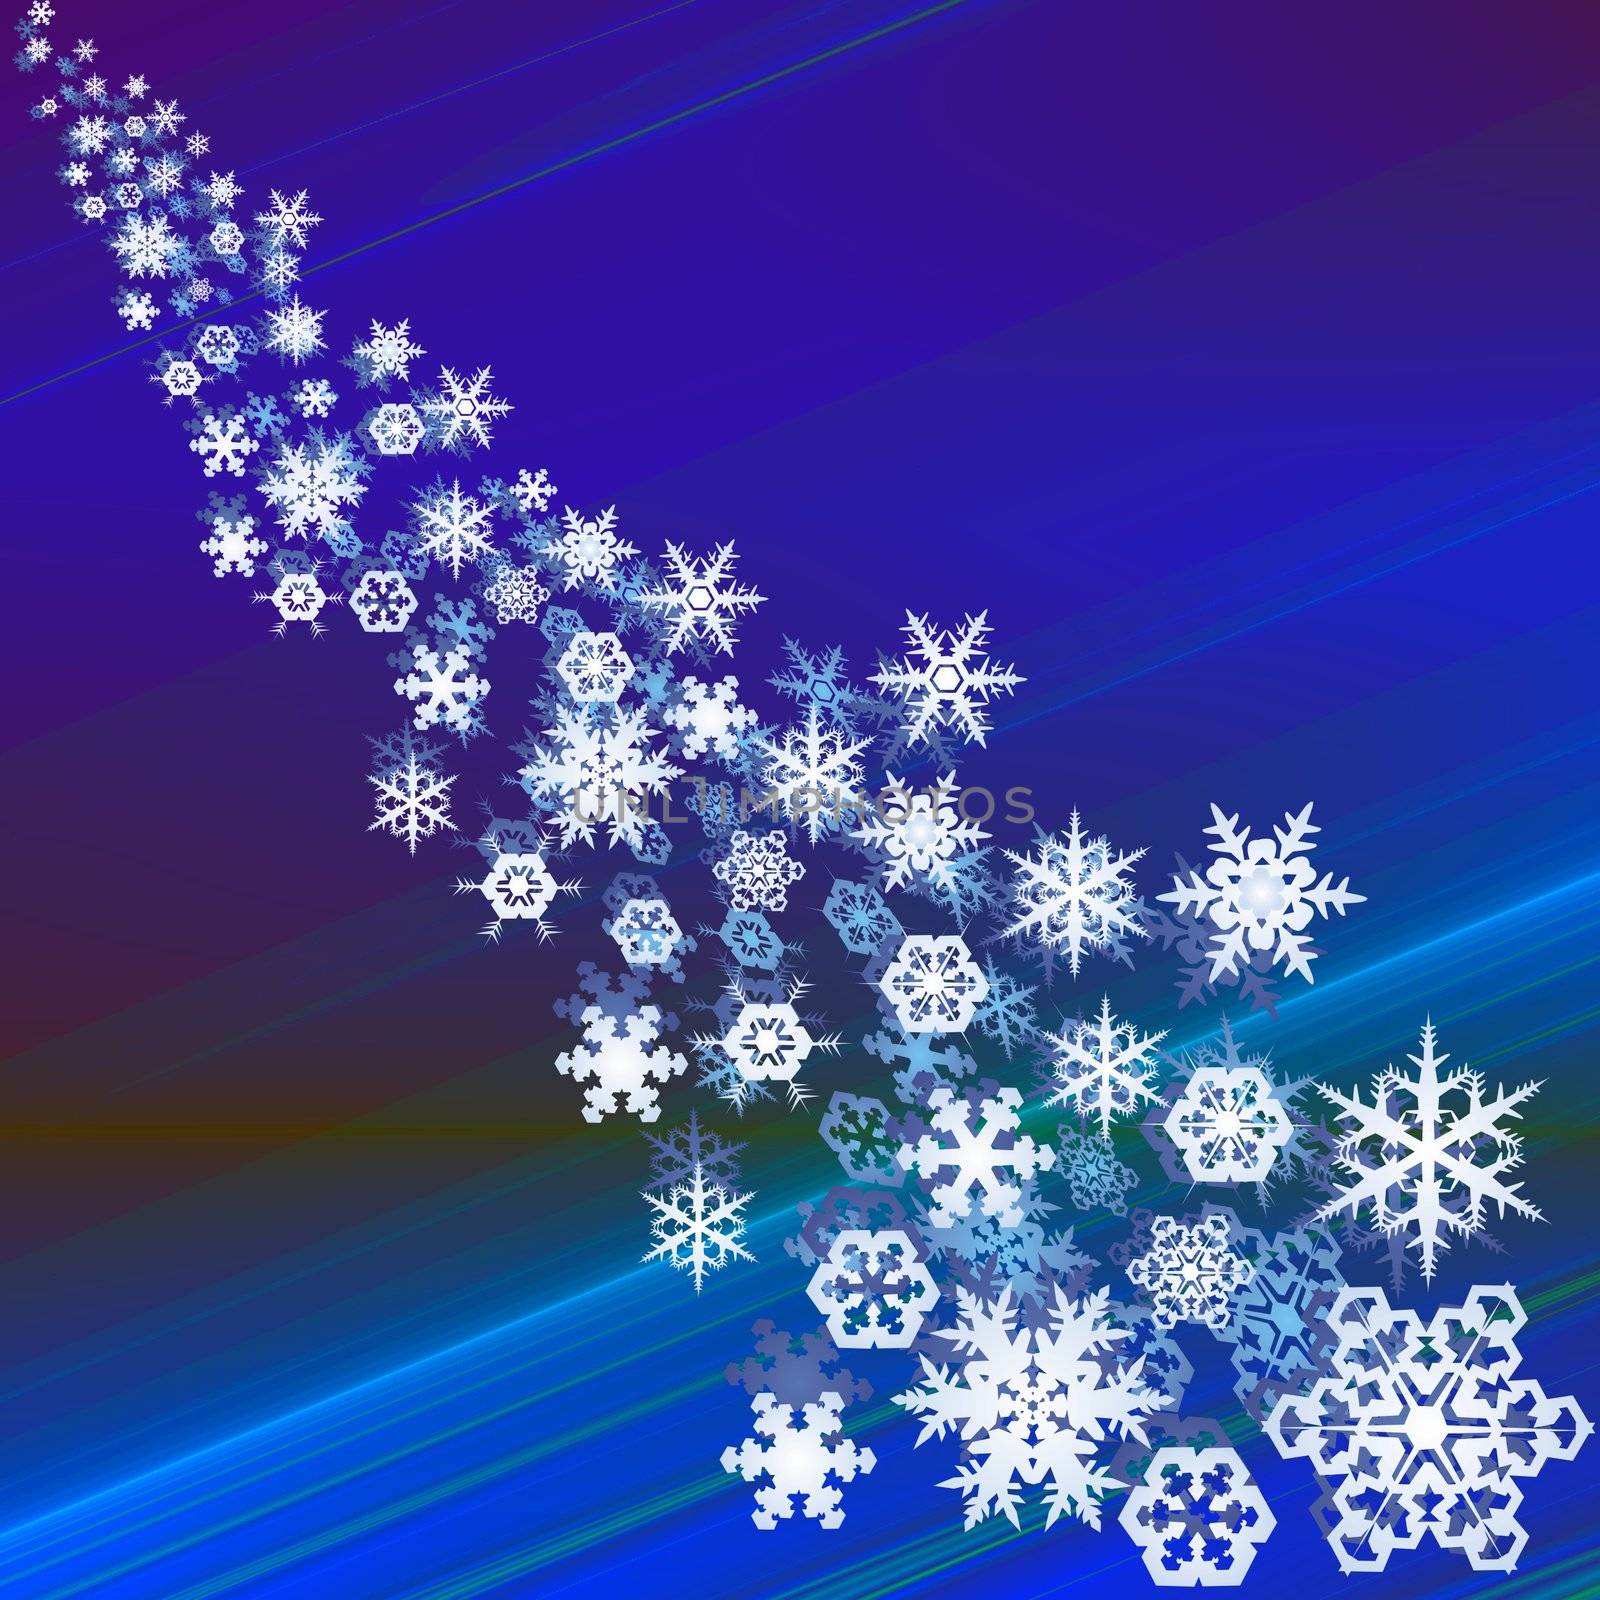 Snowcrystals falling, abstract blue background winter illustration